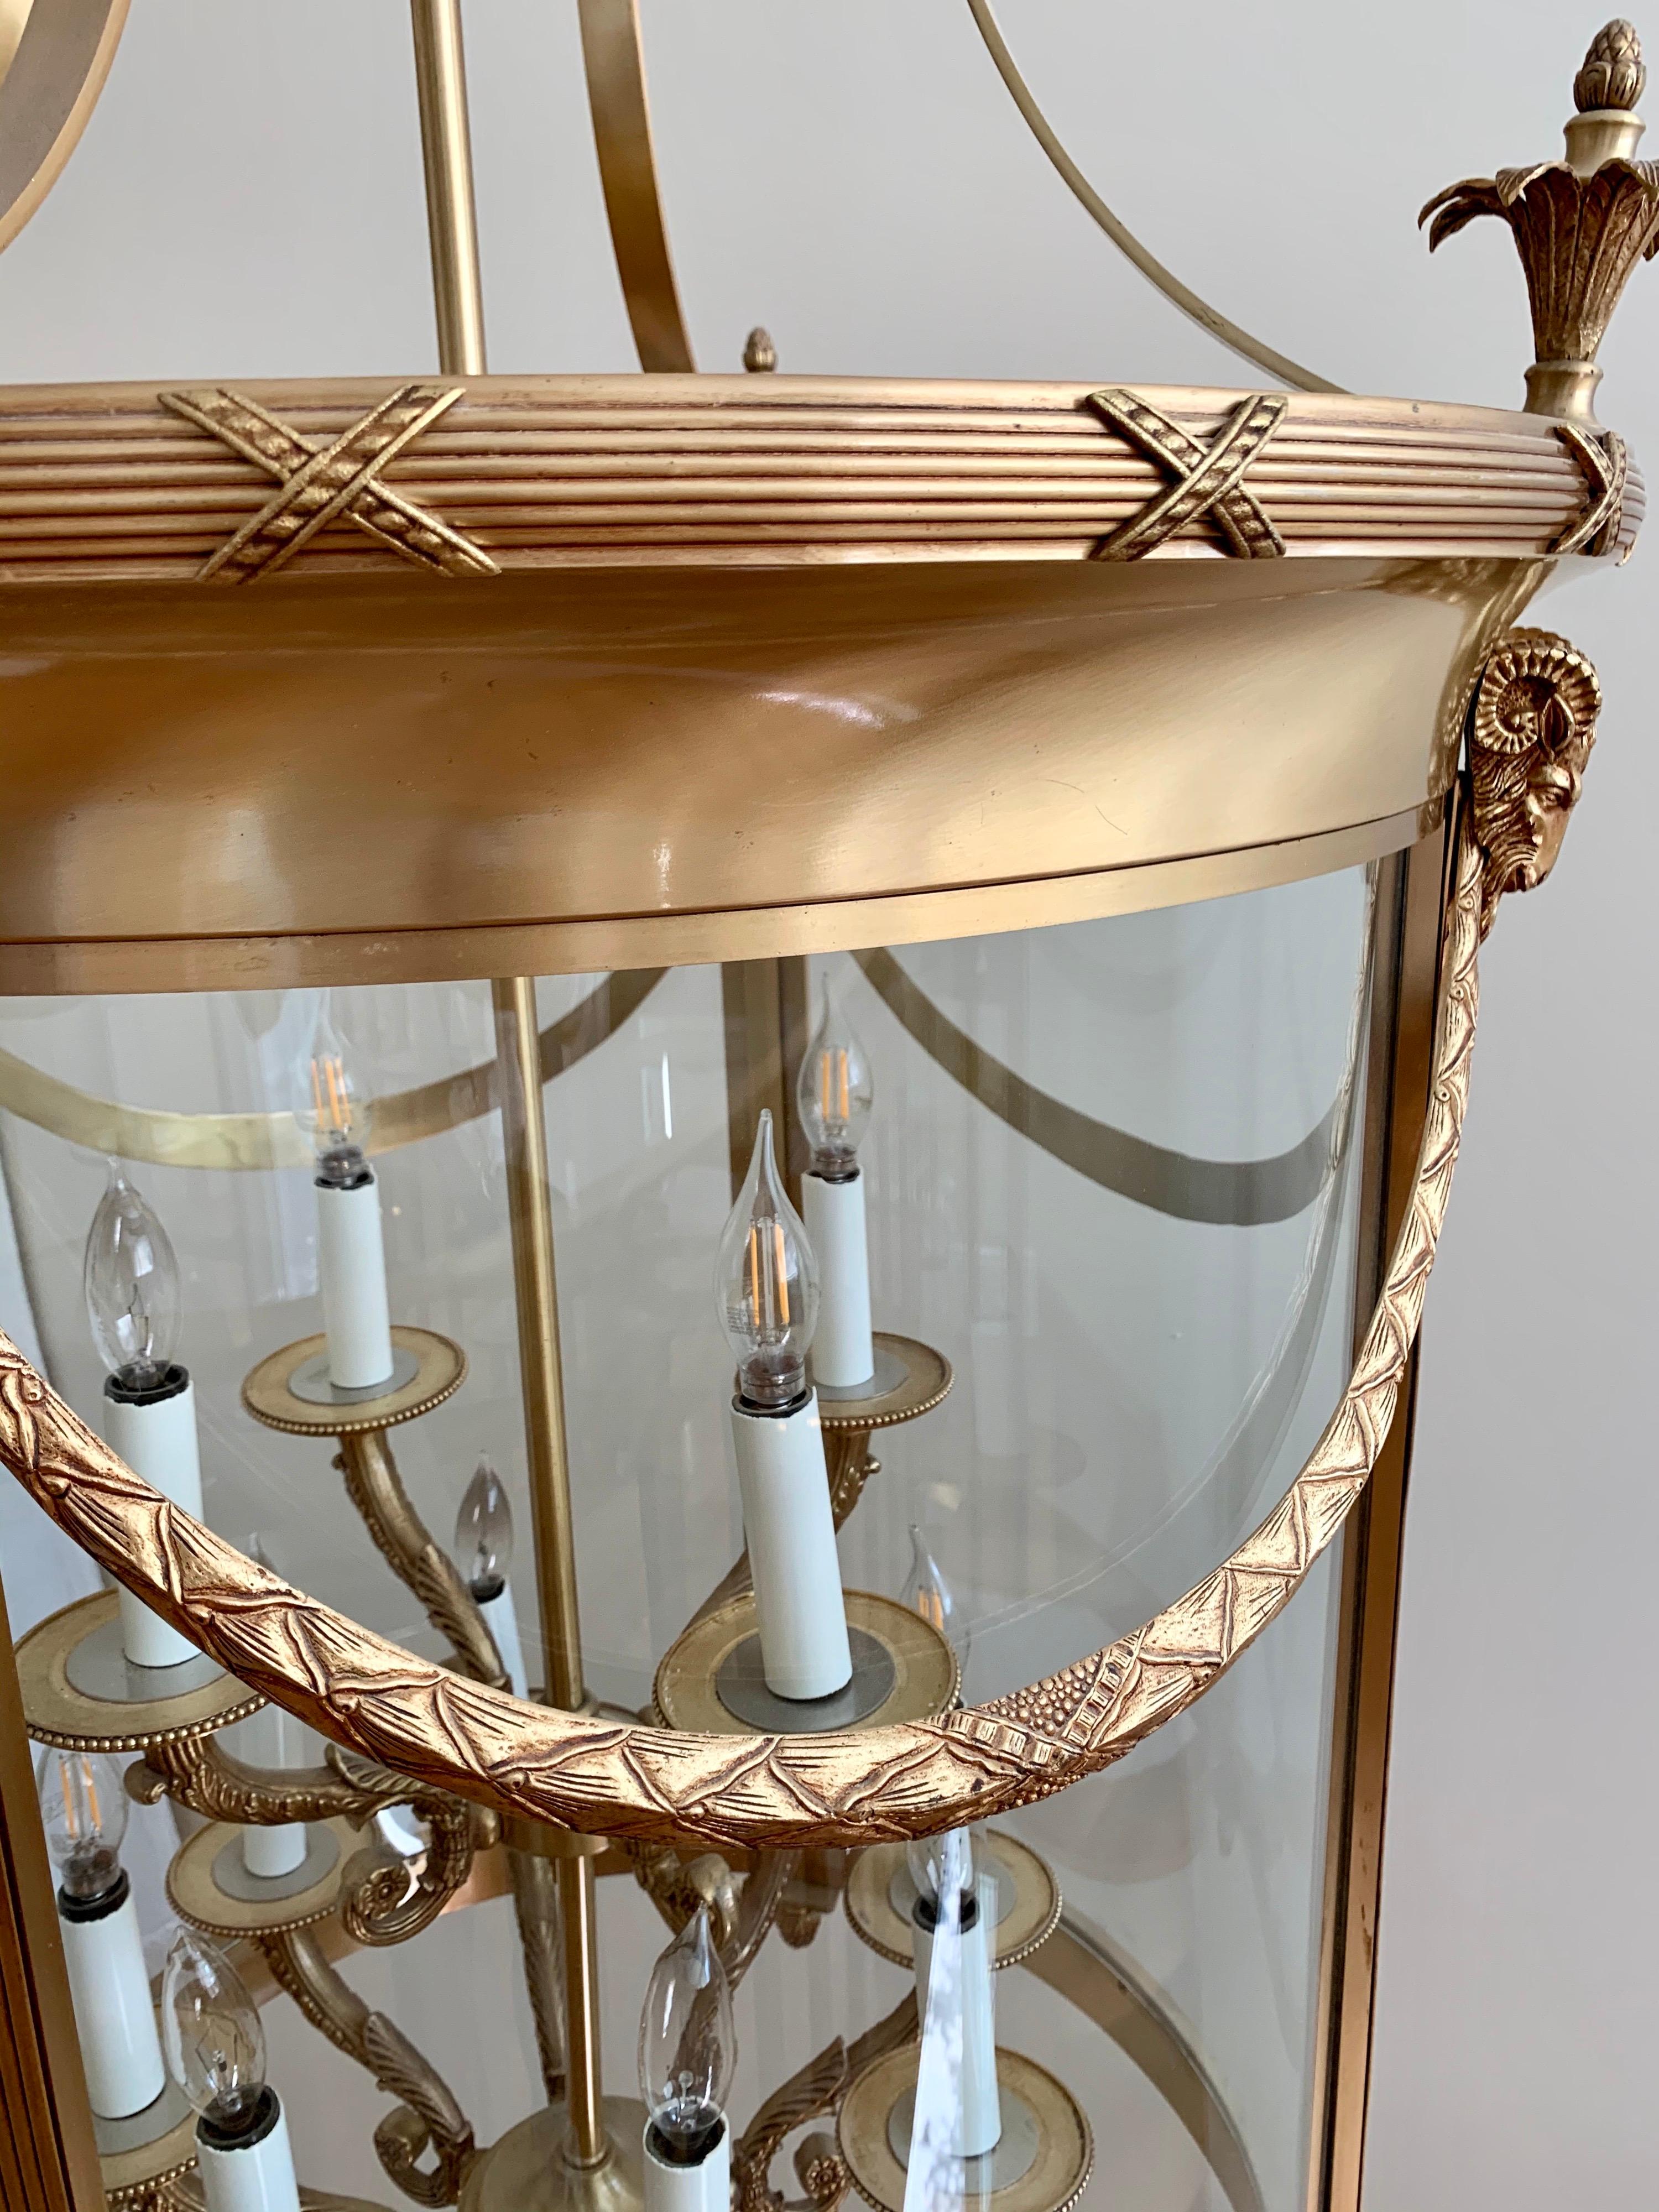 20th Century Large-Scale Foyer Brass Chandelier Cylinder Shaped with Twelve Lights